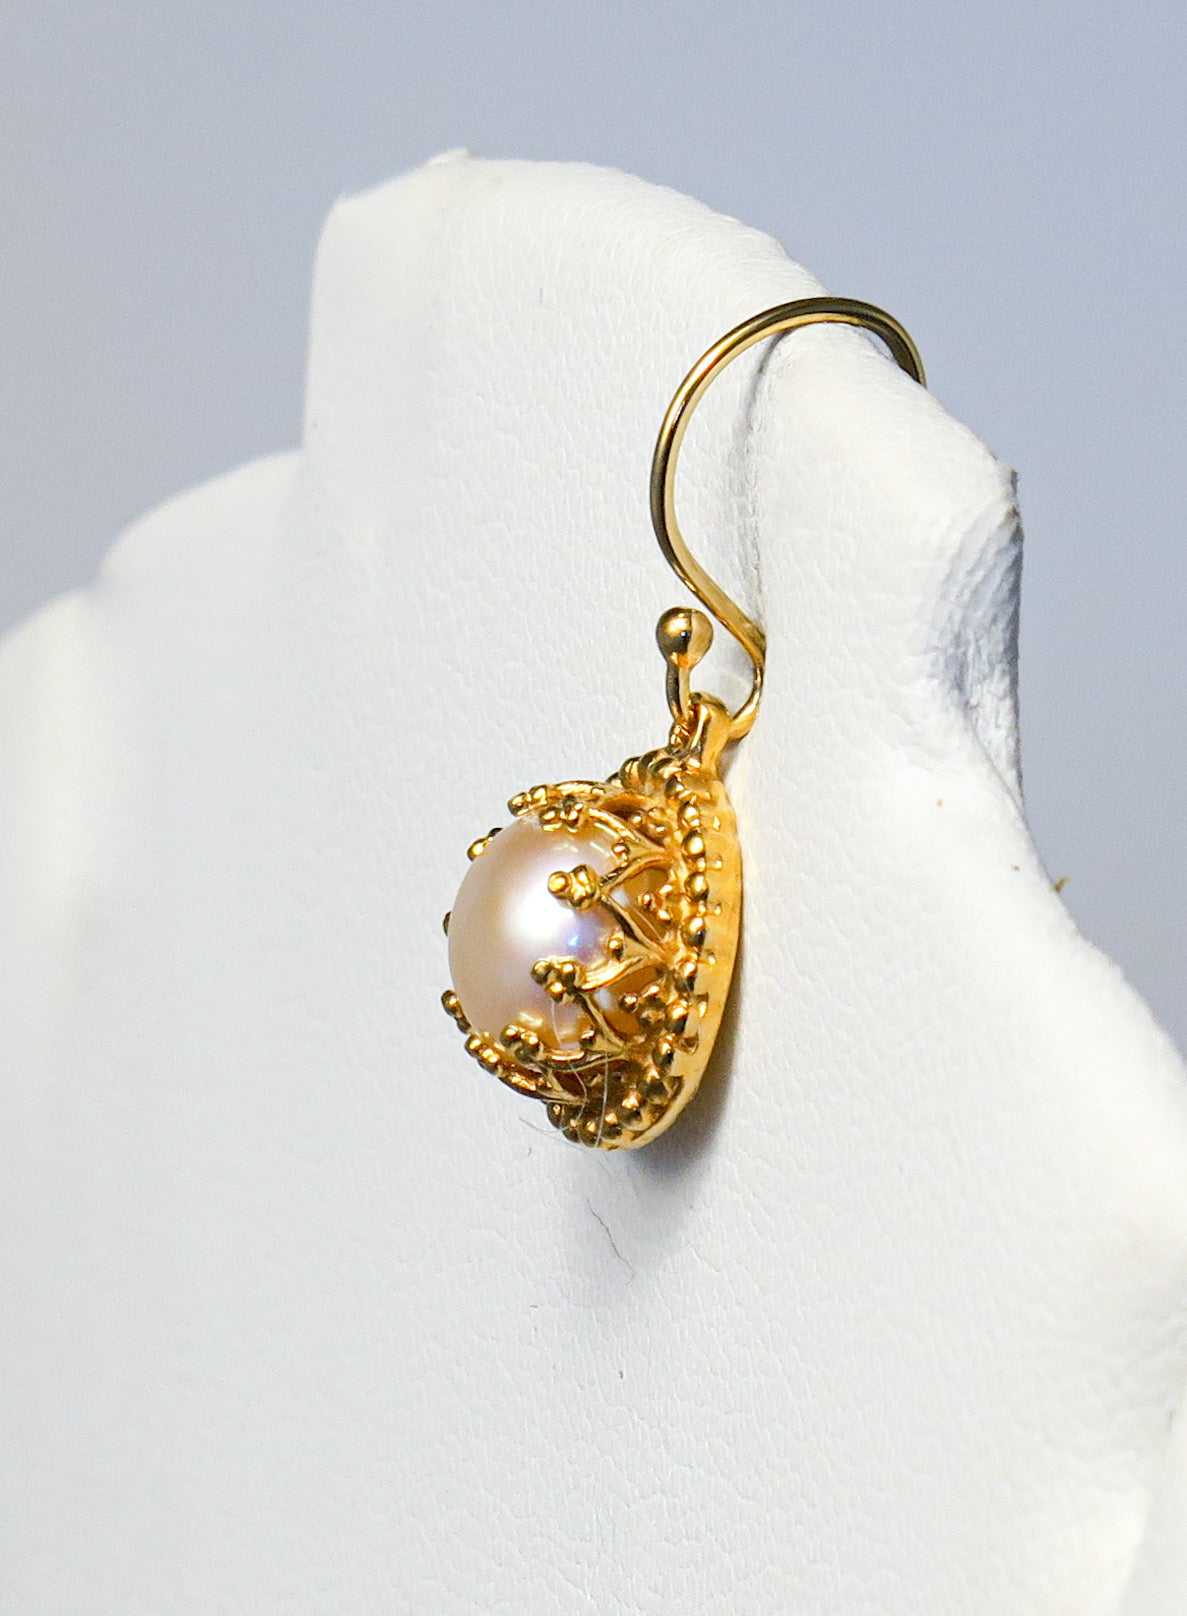 18K Gold Vermeil and Pearl Earrings | by Vanessa Mellet